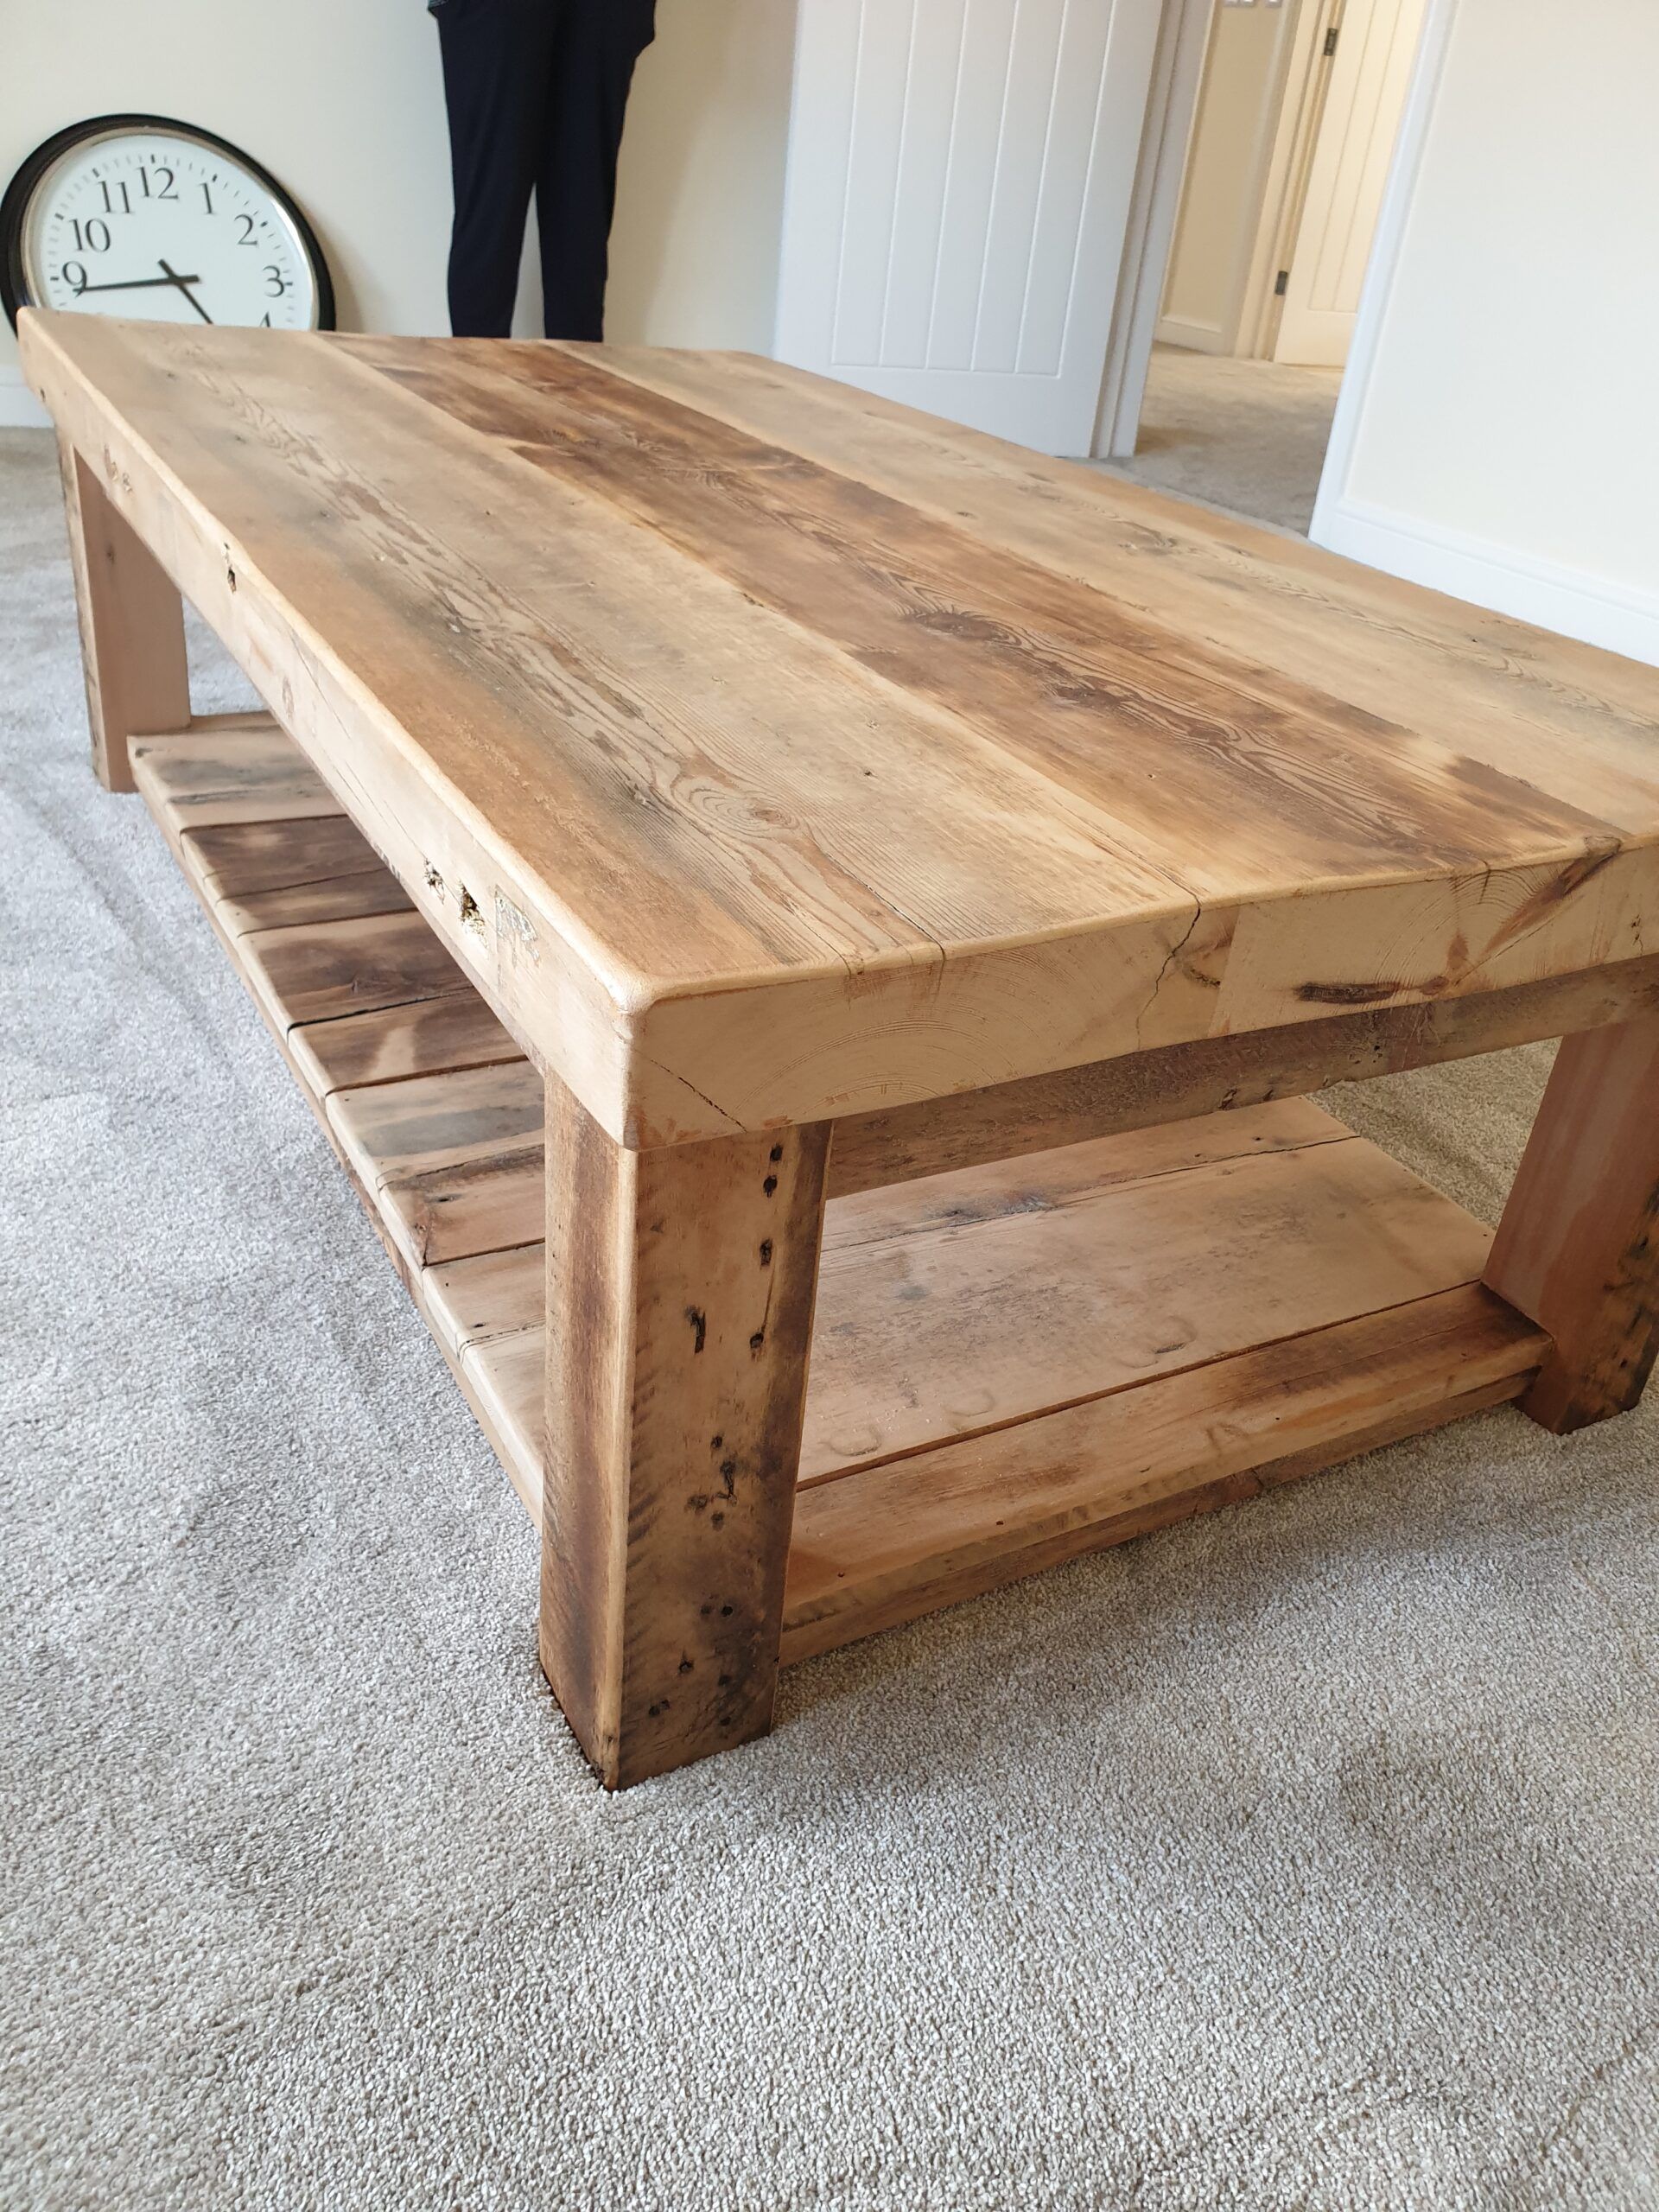 Buy Rustic Wood Coffee Table Made From Reclaimed Timber Throughout Rustic Coffee Tables (View 11 of 15)